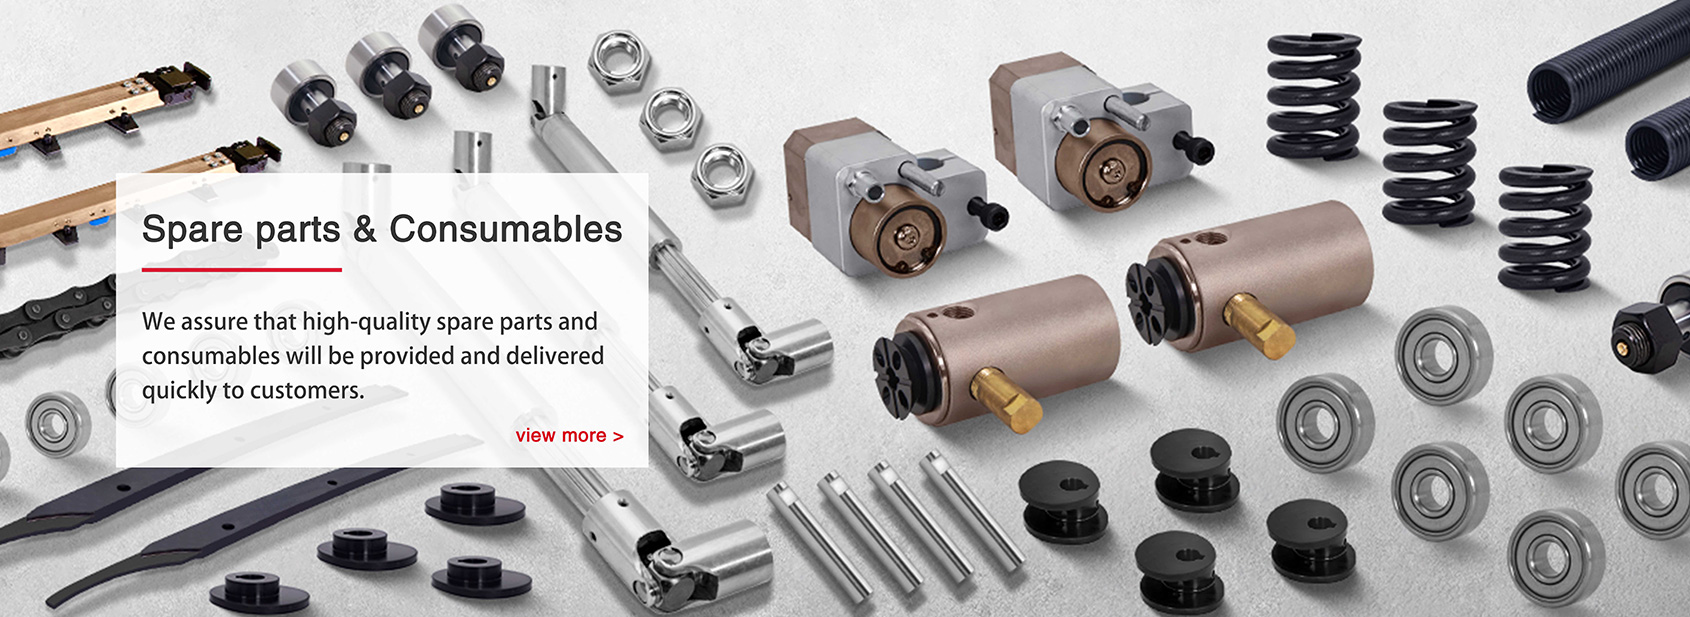 Spare parts & Consumables